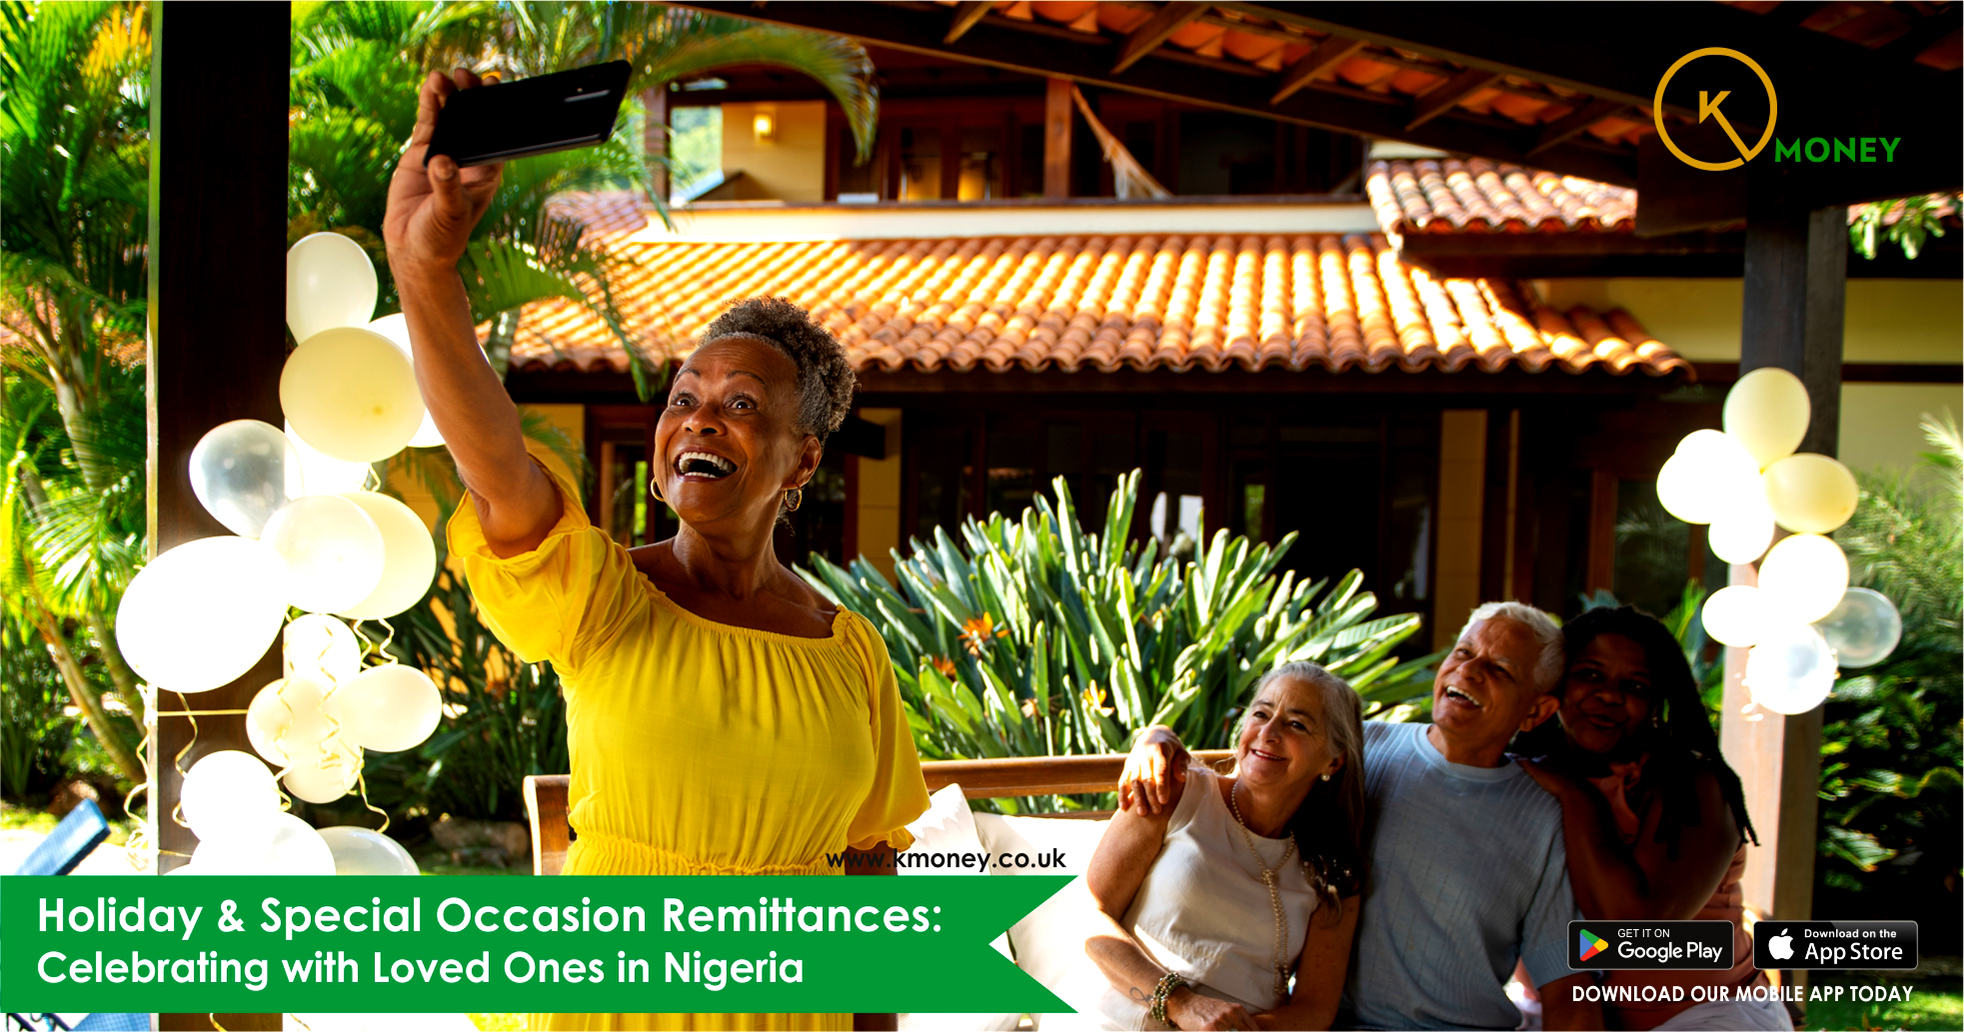 Use Remittance Services to Send Money to Nigeria on Holiday and Special Occasions